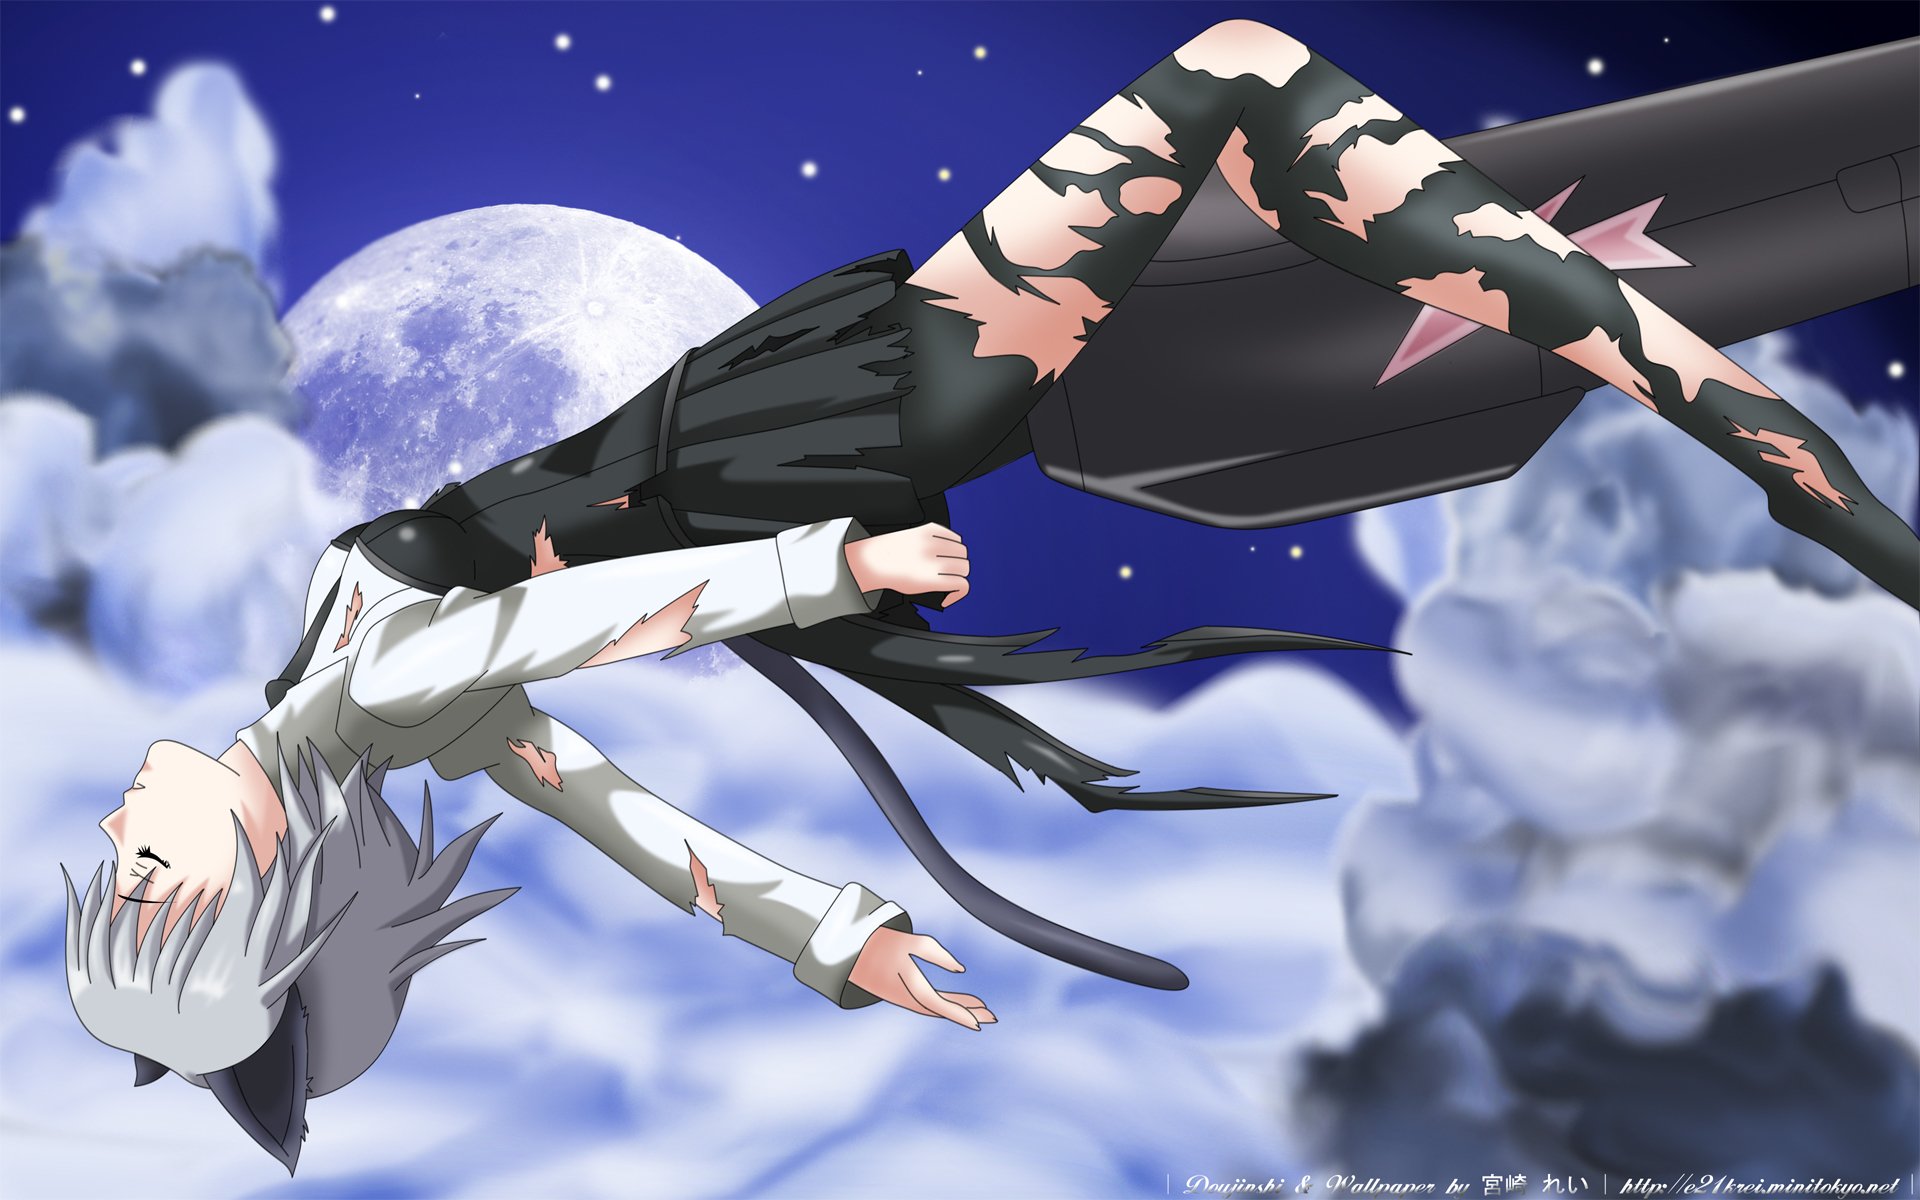 Strike Witches Wallpapers